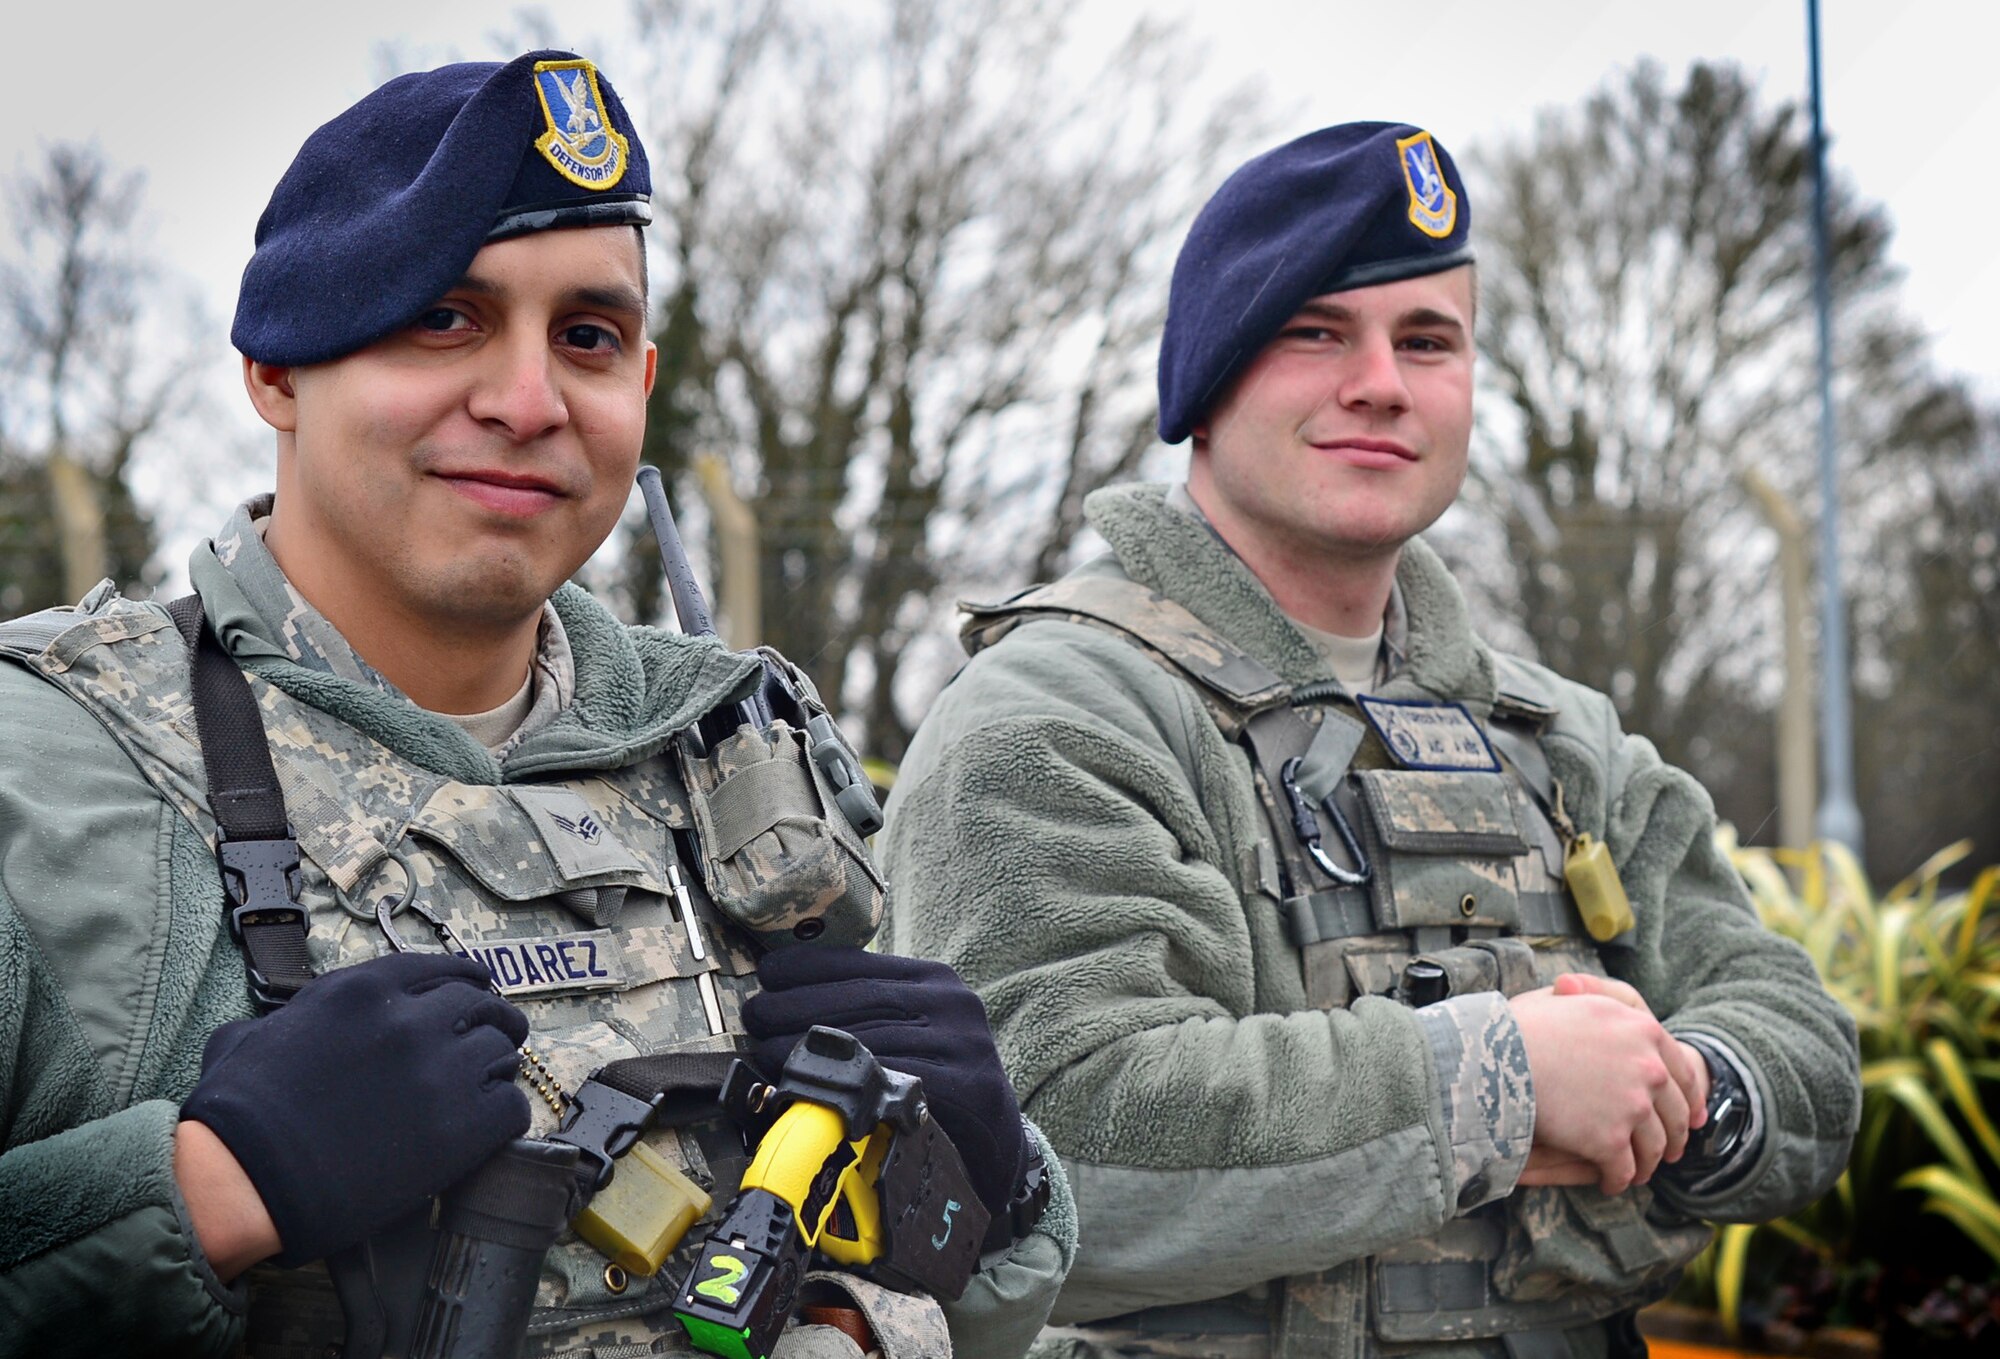 Senior Airman Roland Almendarez and Airman 1st Class Ryan Green, 48th Security Forces Squadron response force members, pose for a photo at the front gate at Royal Air Force Feltwell, England, March 24, 2016. While volunteering at a half marathon, the Airmen employed their medical knowledge to provide critical lifesaving support, when they witnessed a man collapse during the event. (U.S. Air Force photo/Senior Airman Erin Trower) 